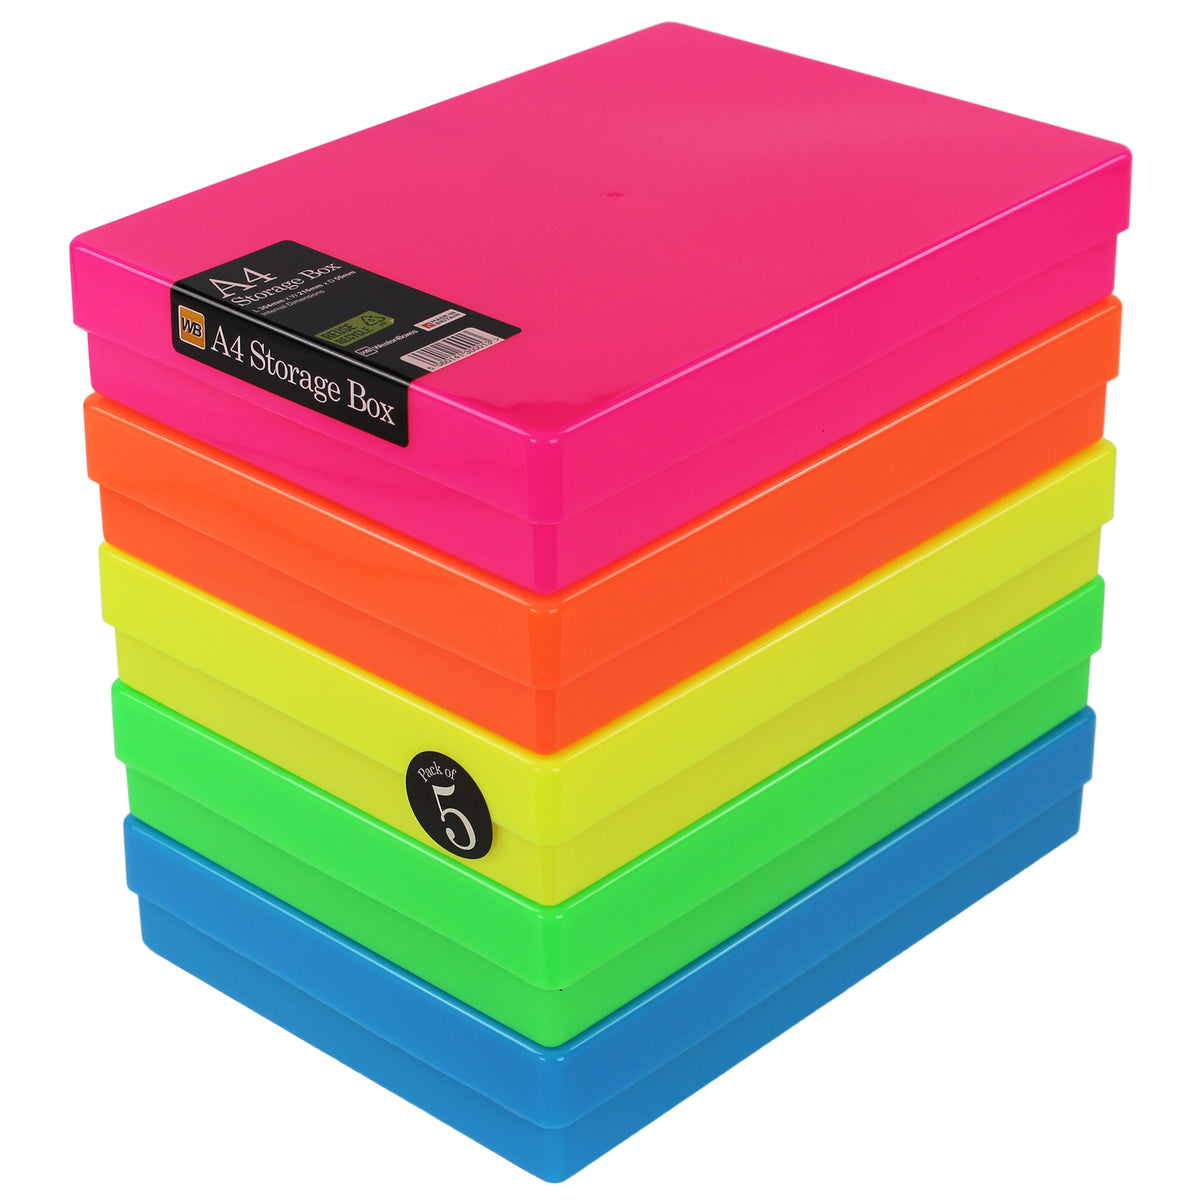 WestonBoxes Neon Plastic Storage Box for A4 Paper, Clear